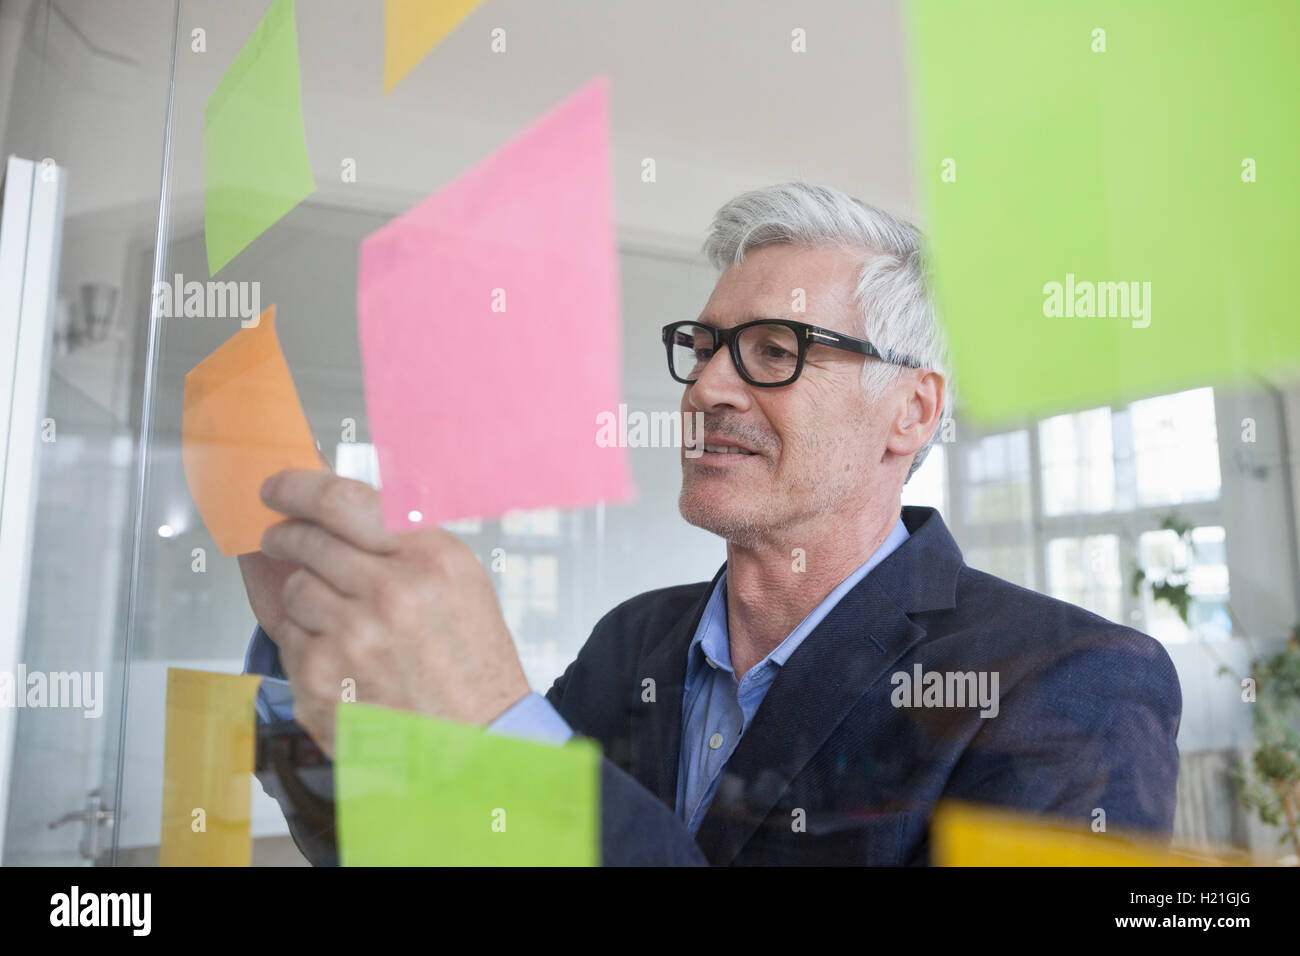 Businessman in office attaching adhesive notes at glass pane Stock Photo